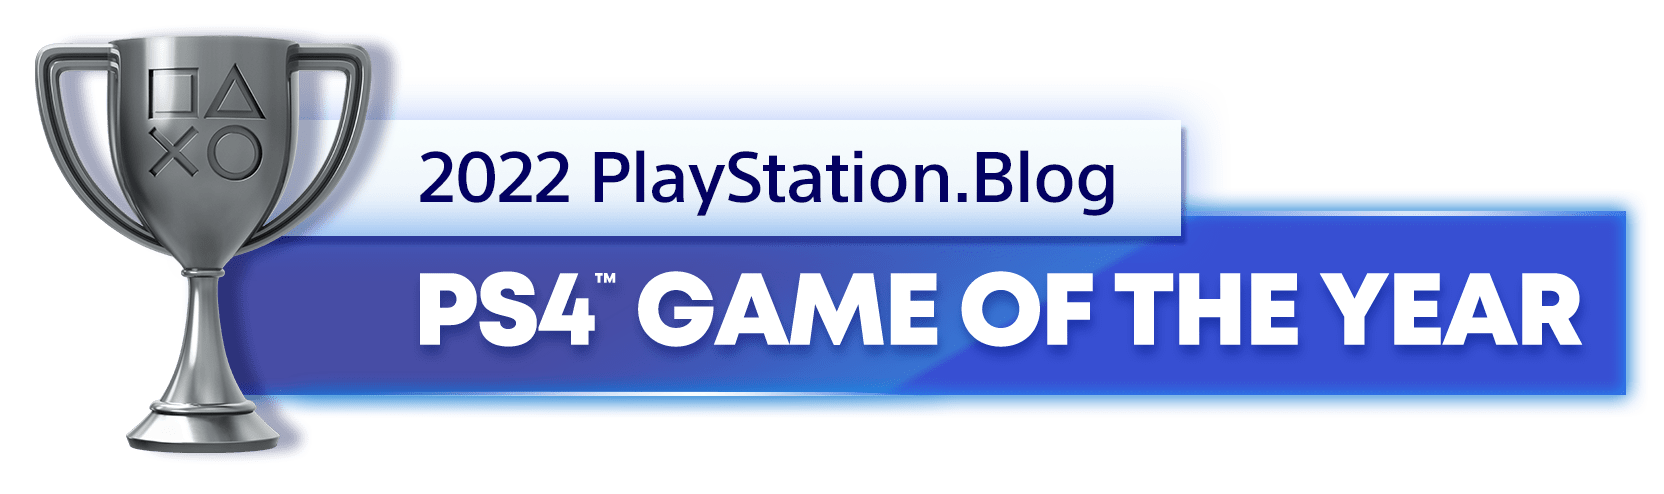 PlayStation Blog's 2022 Silver trophy for PS4 game of the year